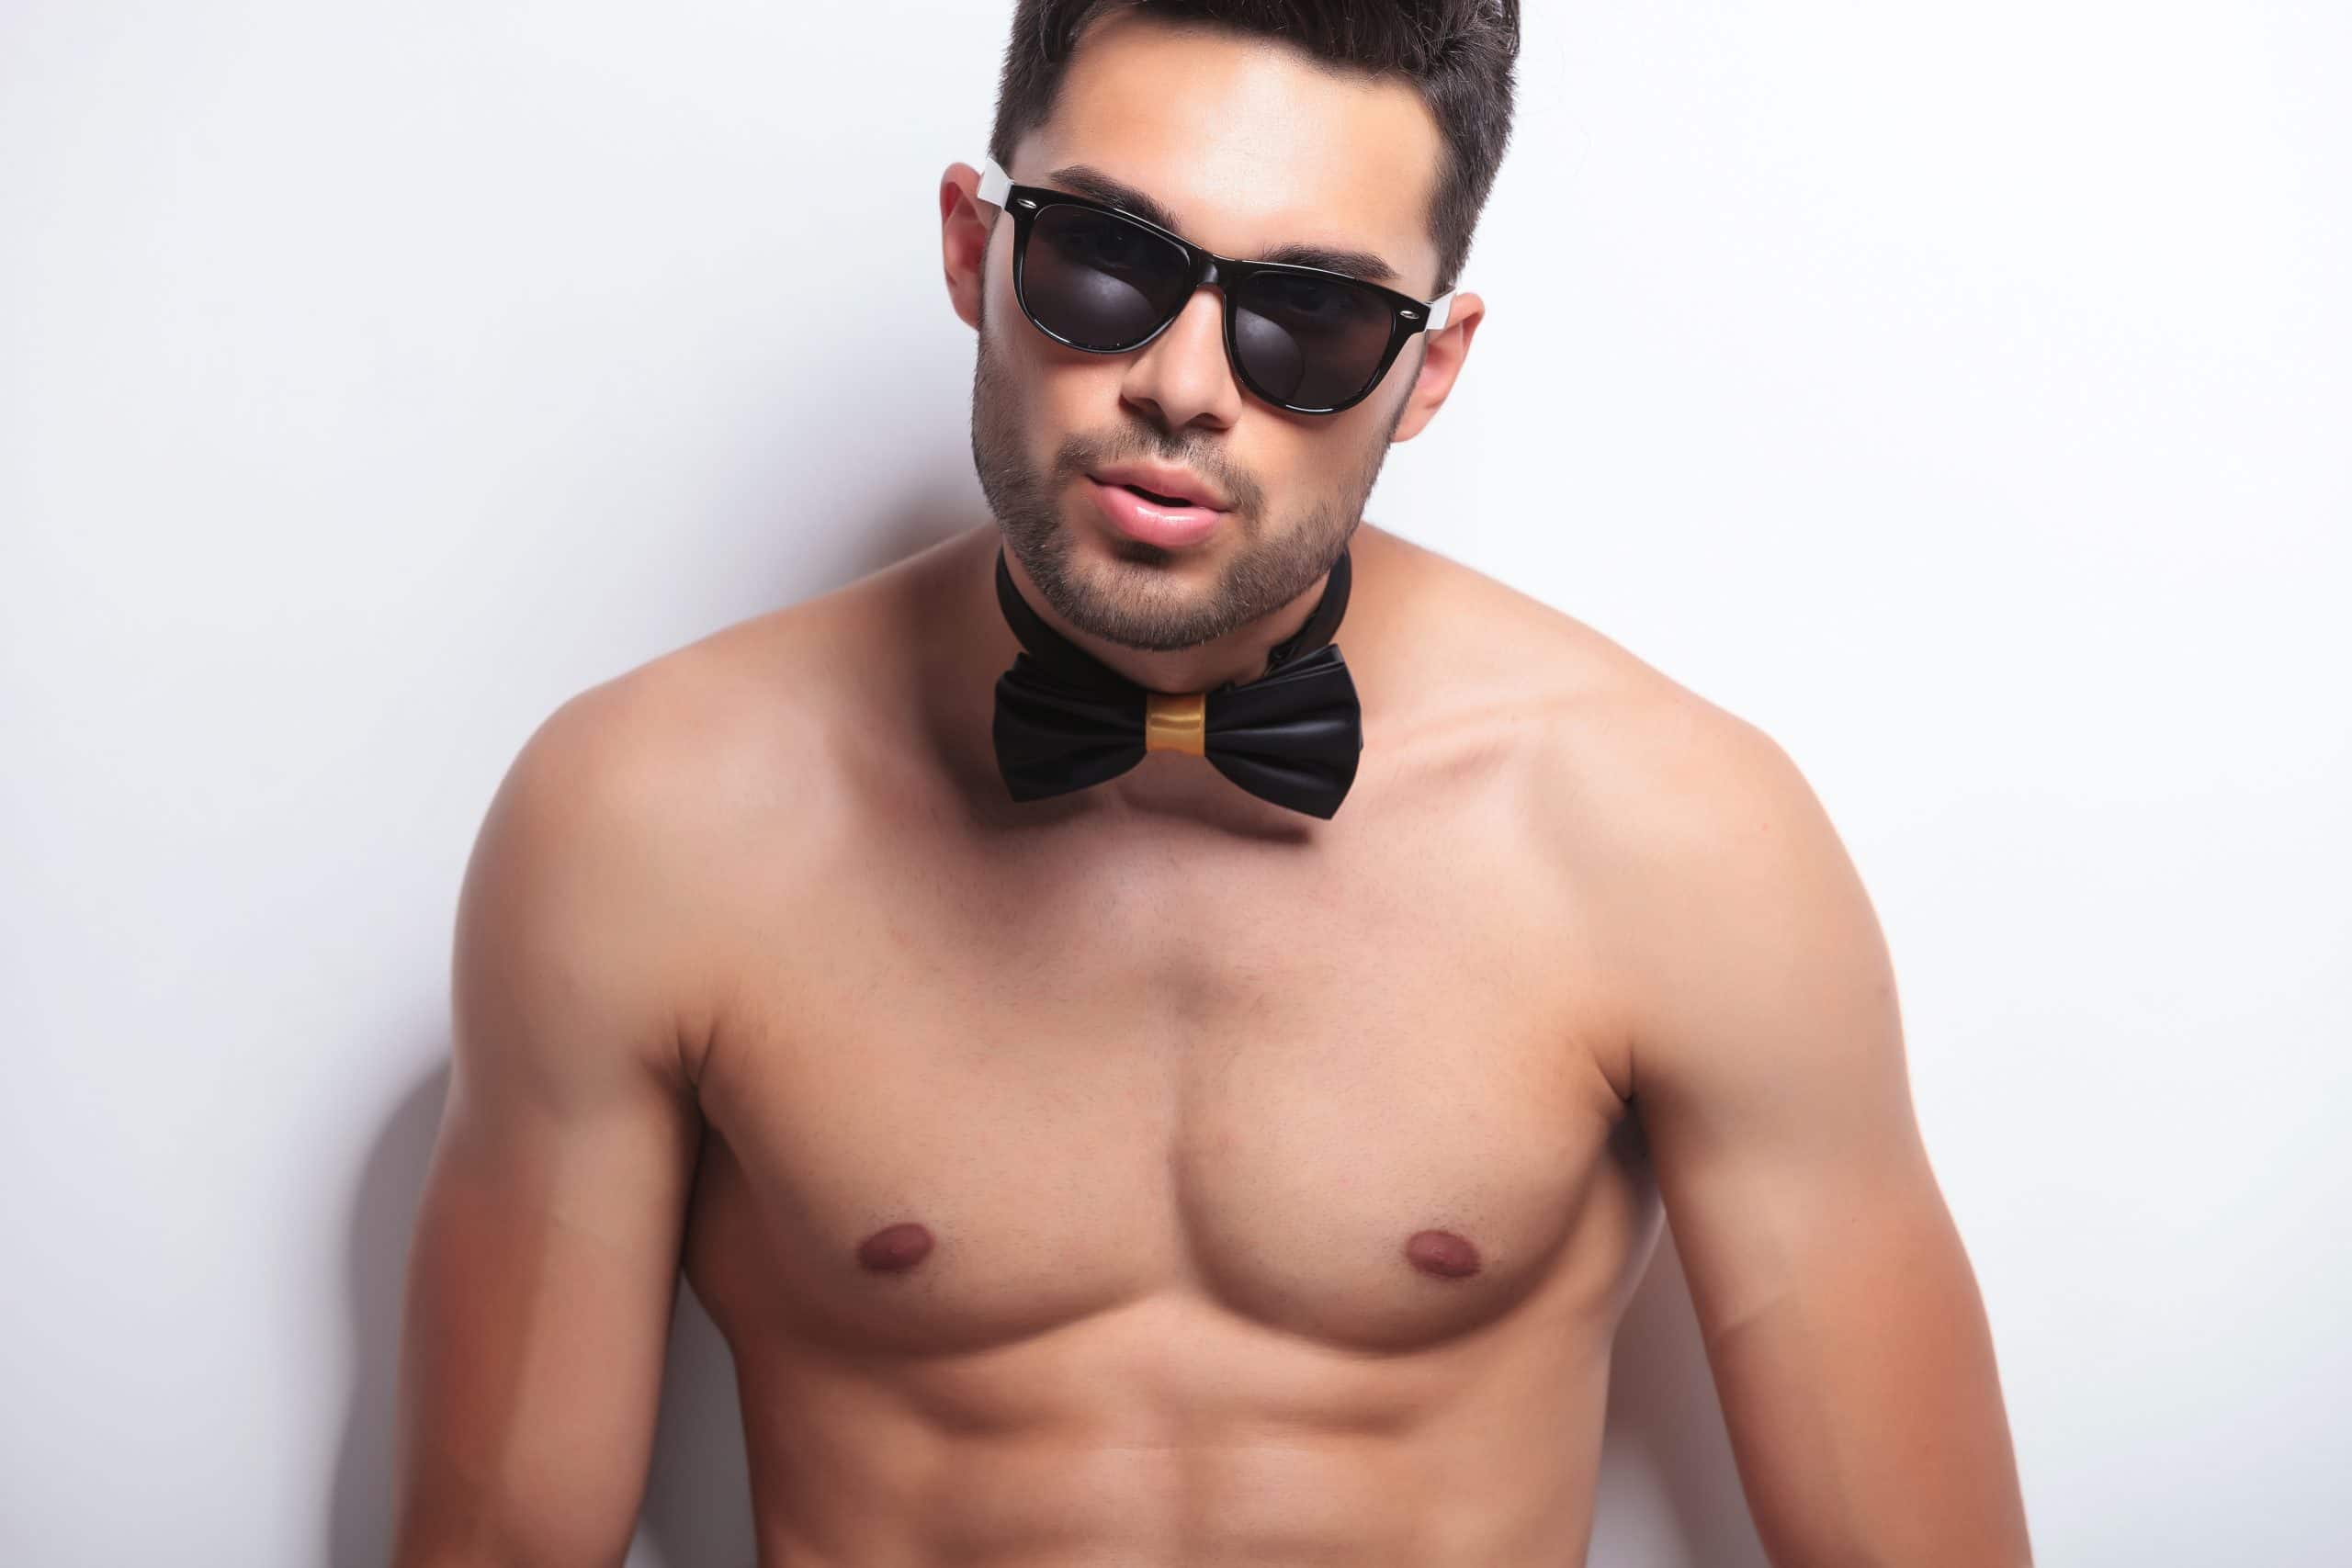 Male stripper with sunglasses and bow tie posing